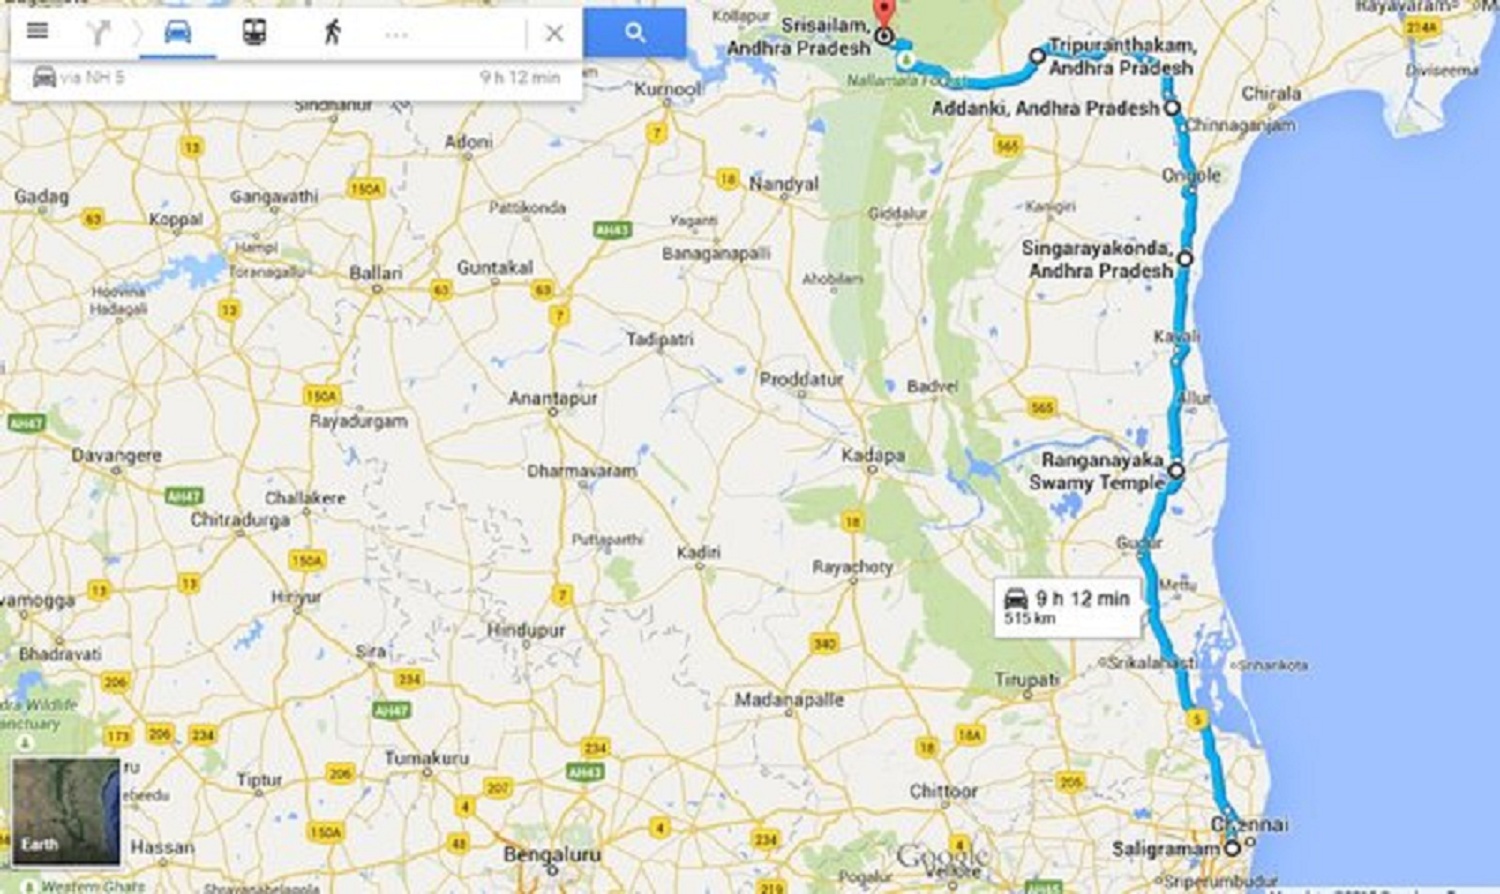 Travelling And Route Map Of Srisailam,Kurnool District Andhra Pradesh